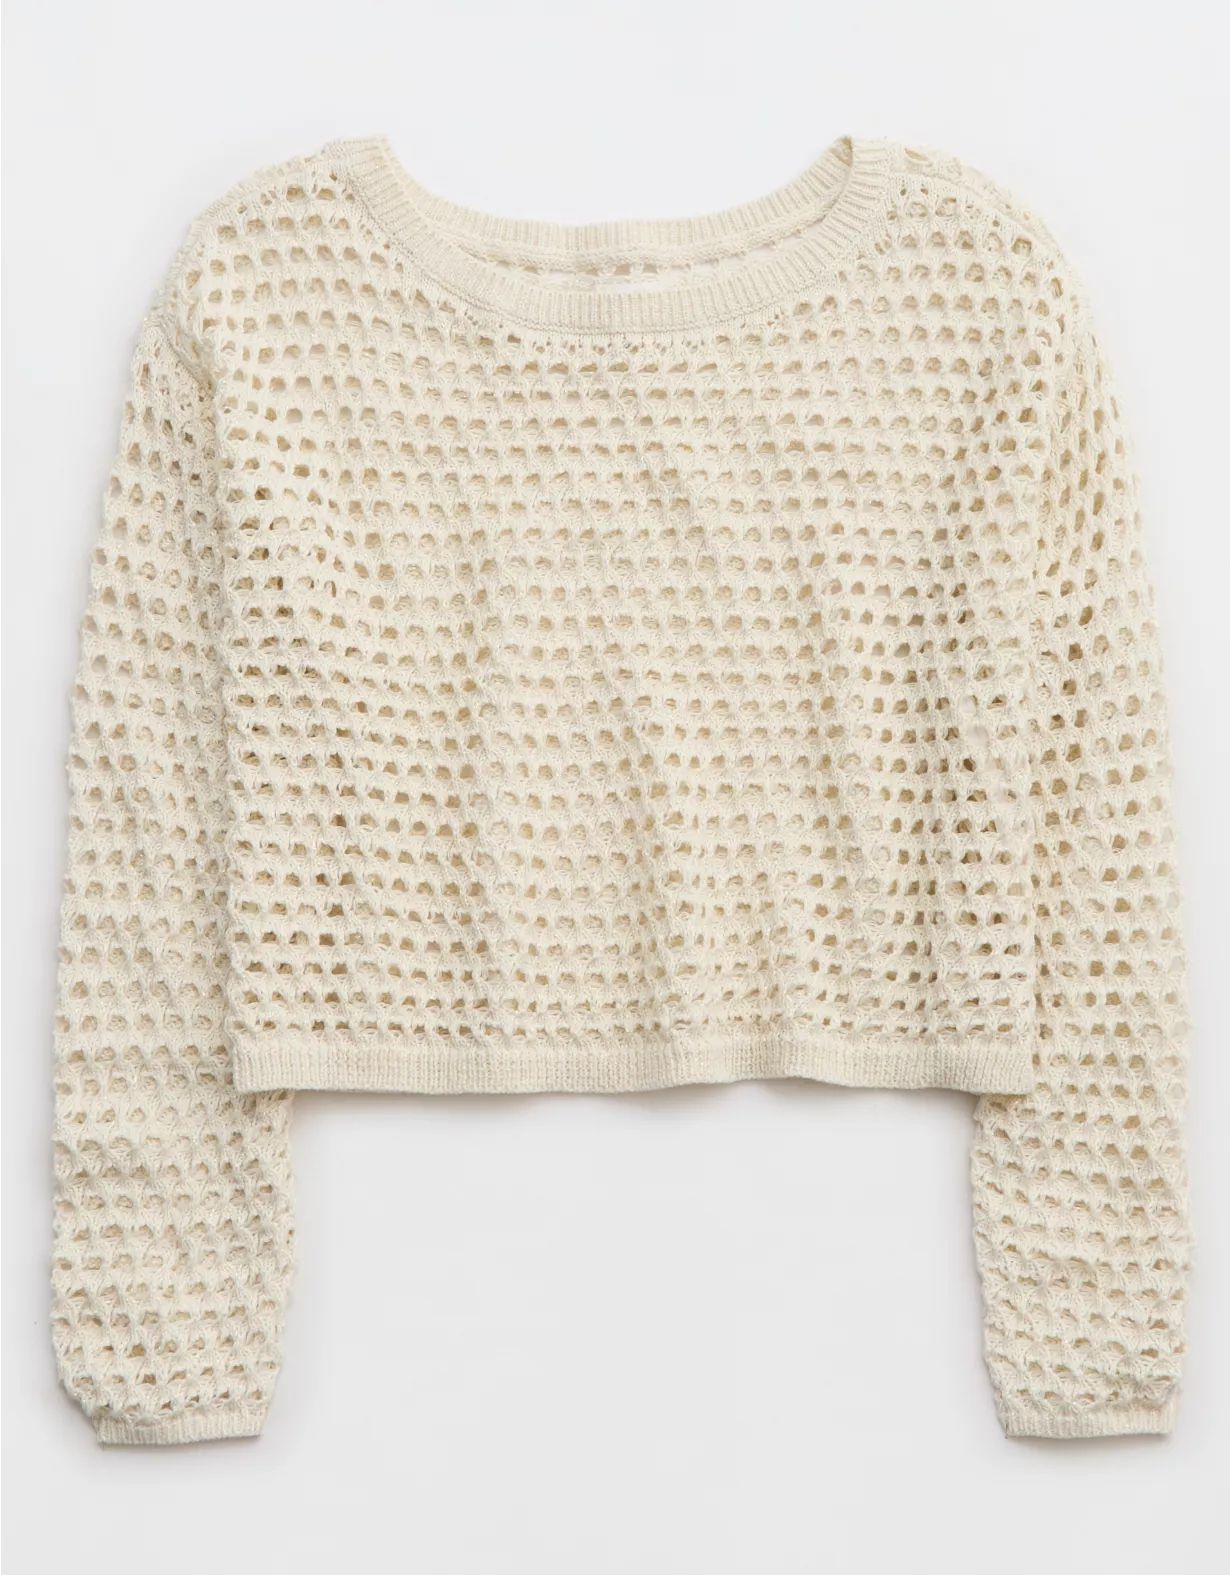 Aerie Crochet Vacay Sweater | Aerie